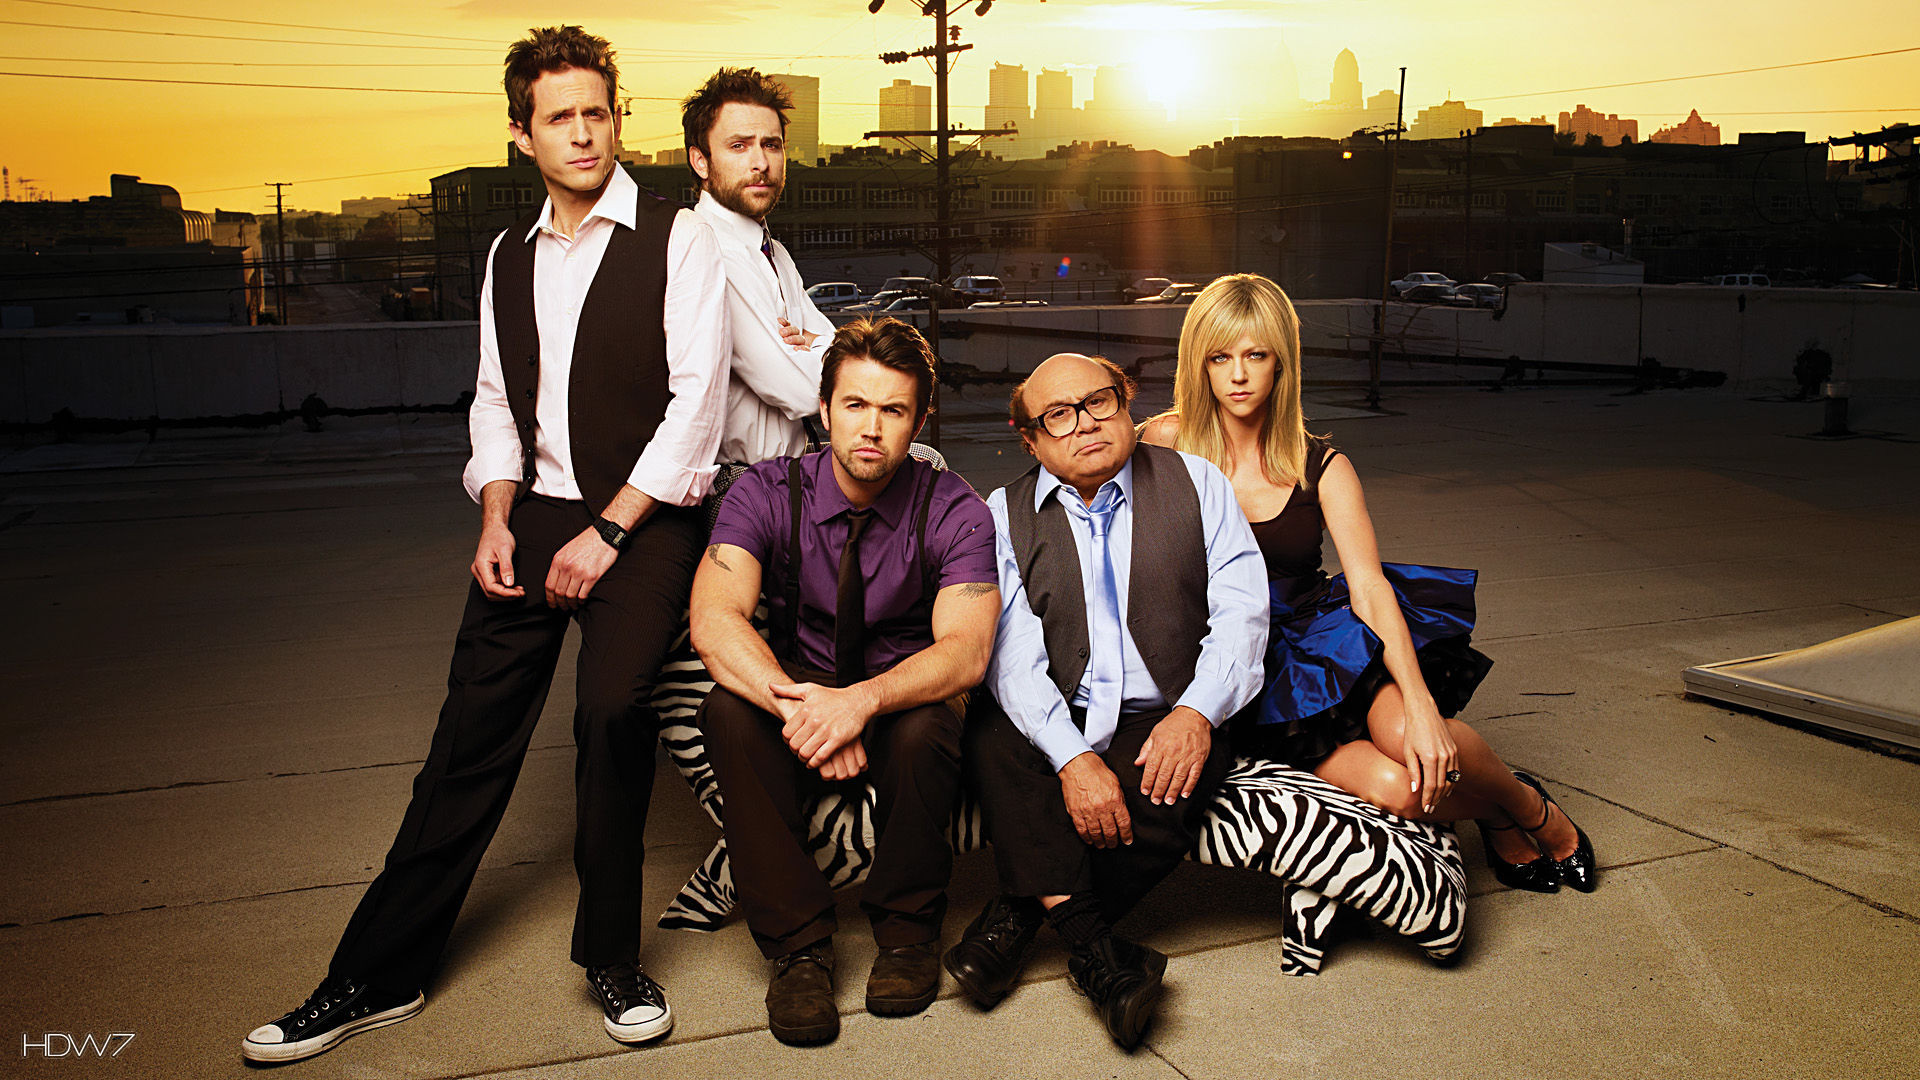 always sunny wallpaper,social group,people,youth,event,fashion